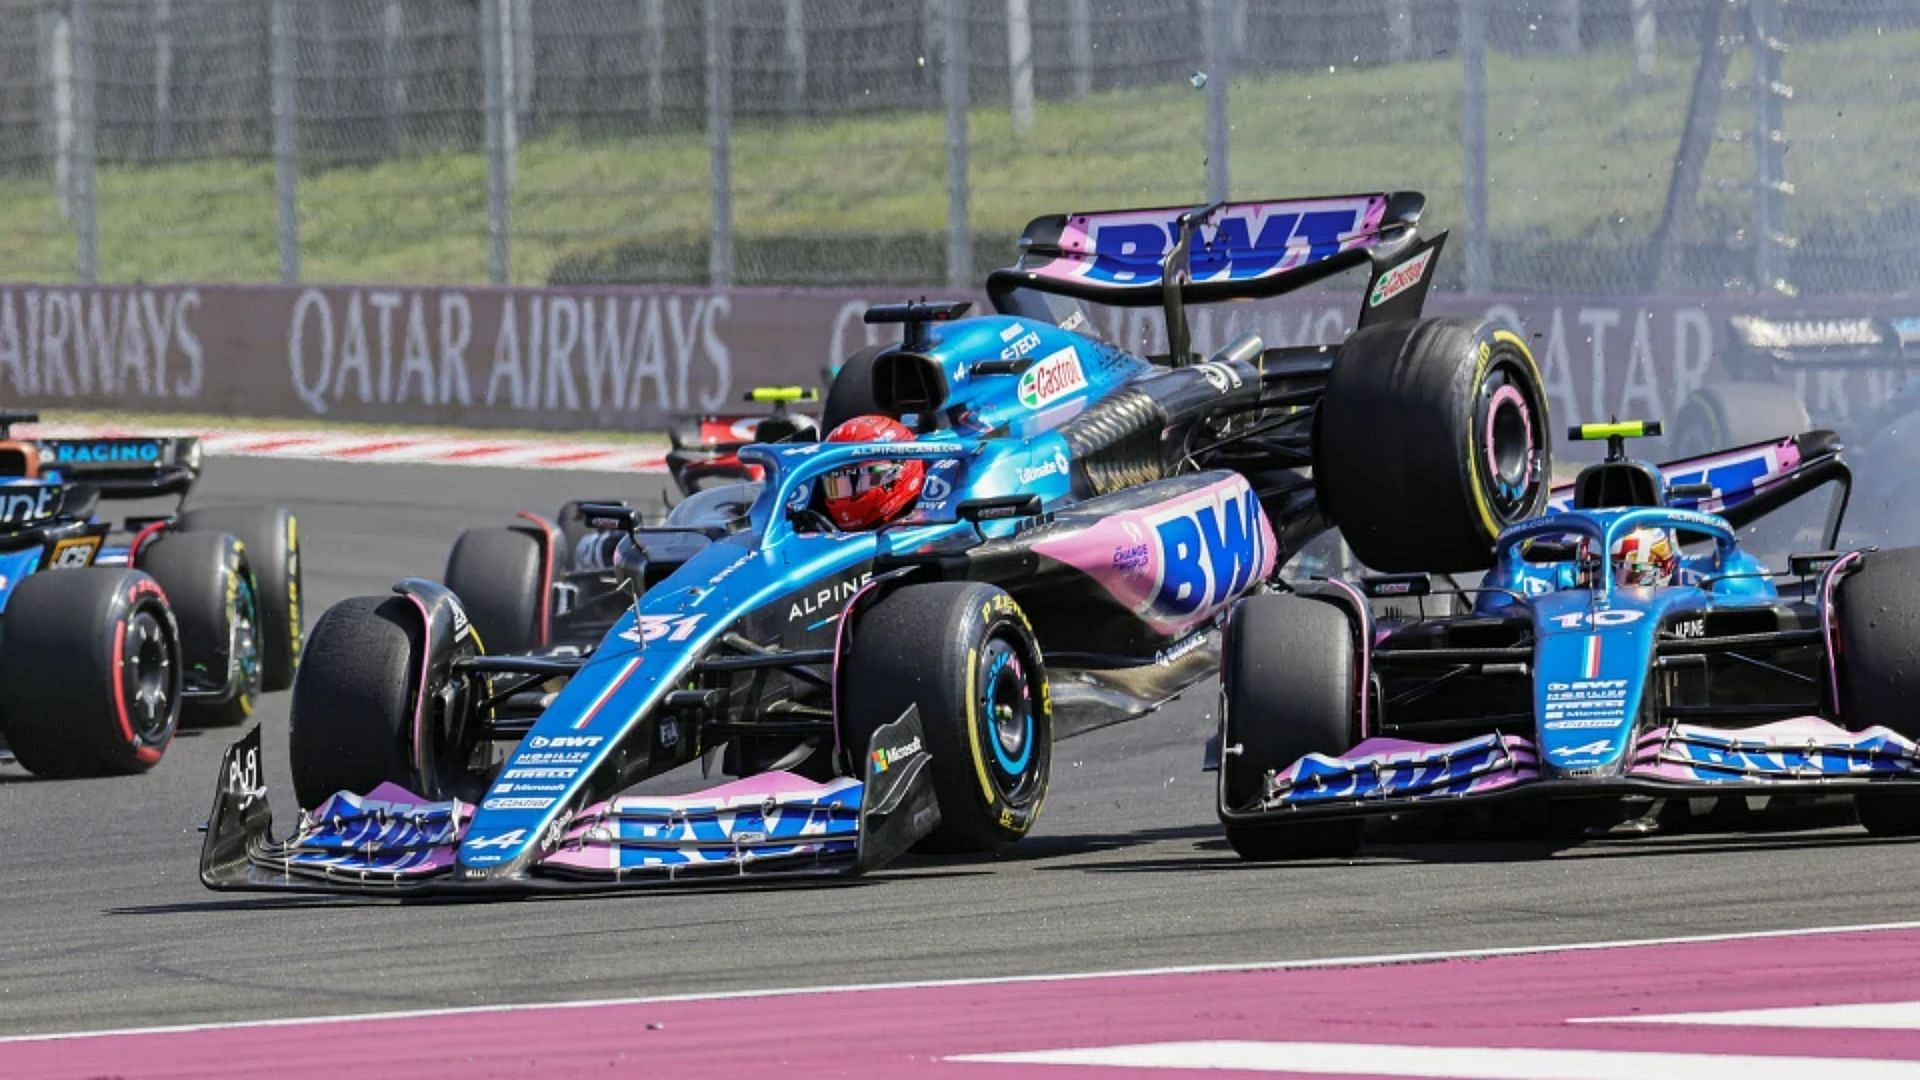 Esteban Ocon (31) and Pierre Gasly (10) crash into each other at the start of the 2023 F1 Hungarian Grand Prix (Image via The Sun content pool)